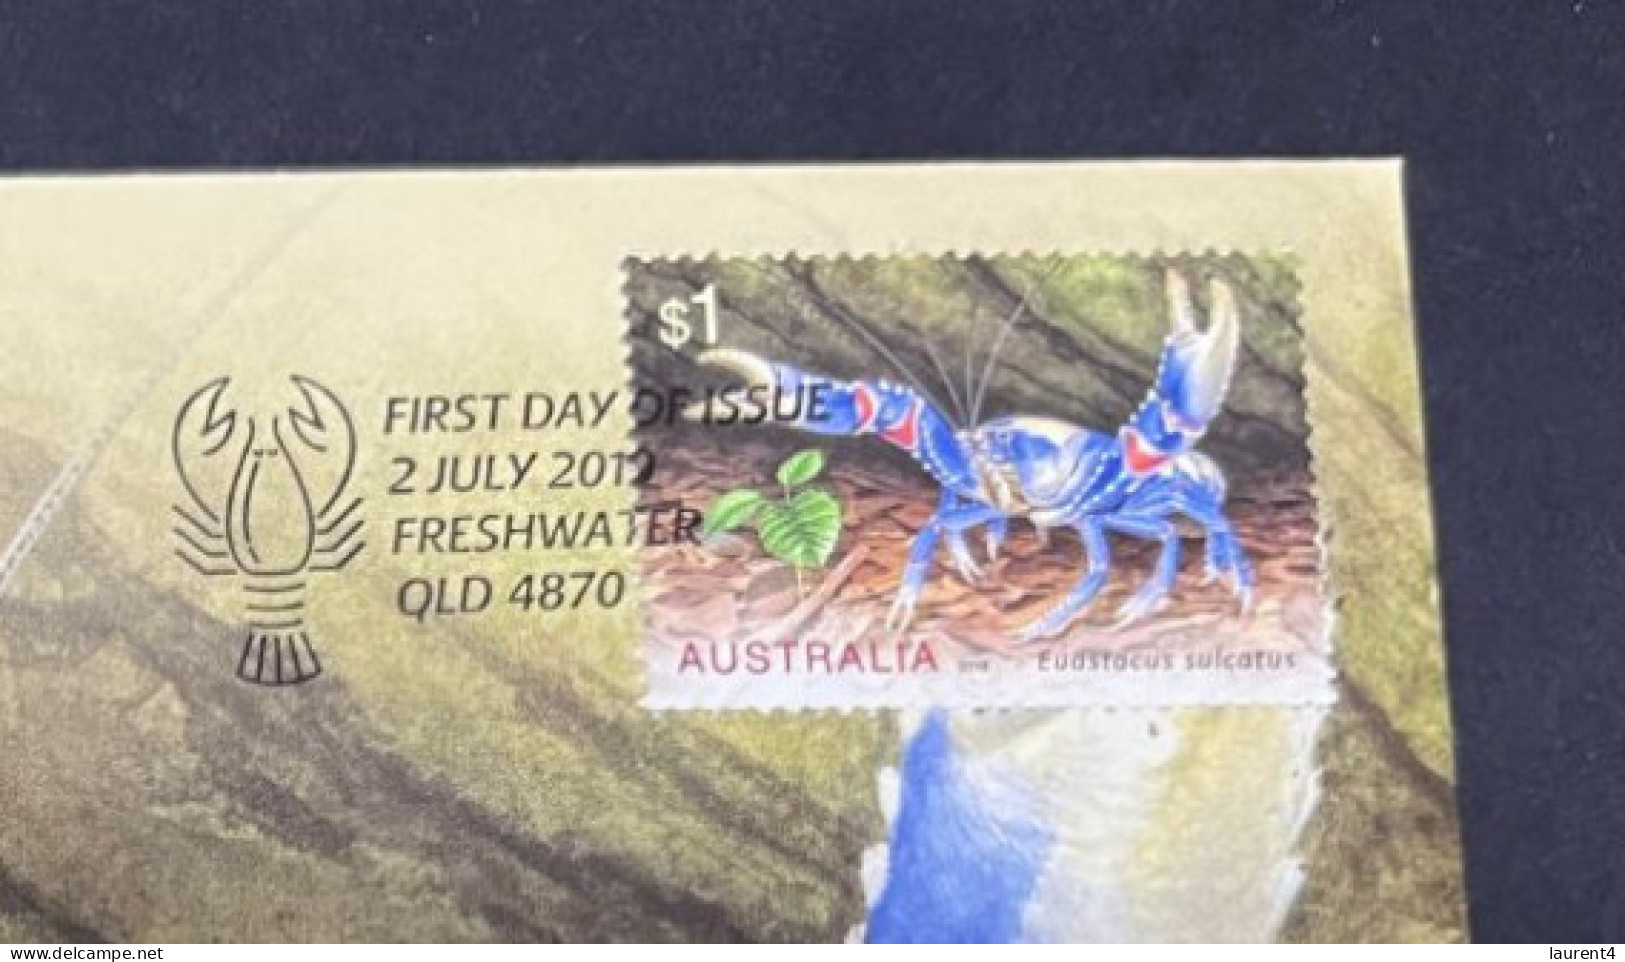 5-5-2024 (4 Z 14) Australia Freshwater 2019 Crayfish Medallion Colored Cover (seashell / Coquillage / Crab) 0363/2000 - Token Coinage (POW)